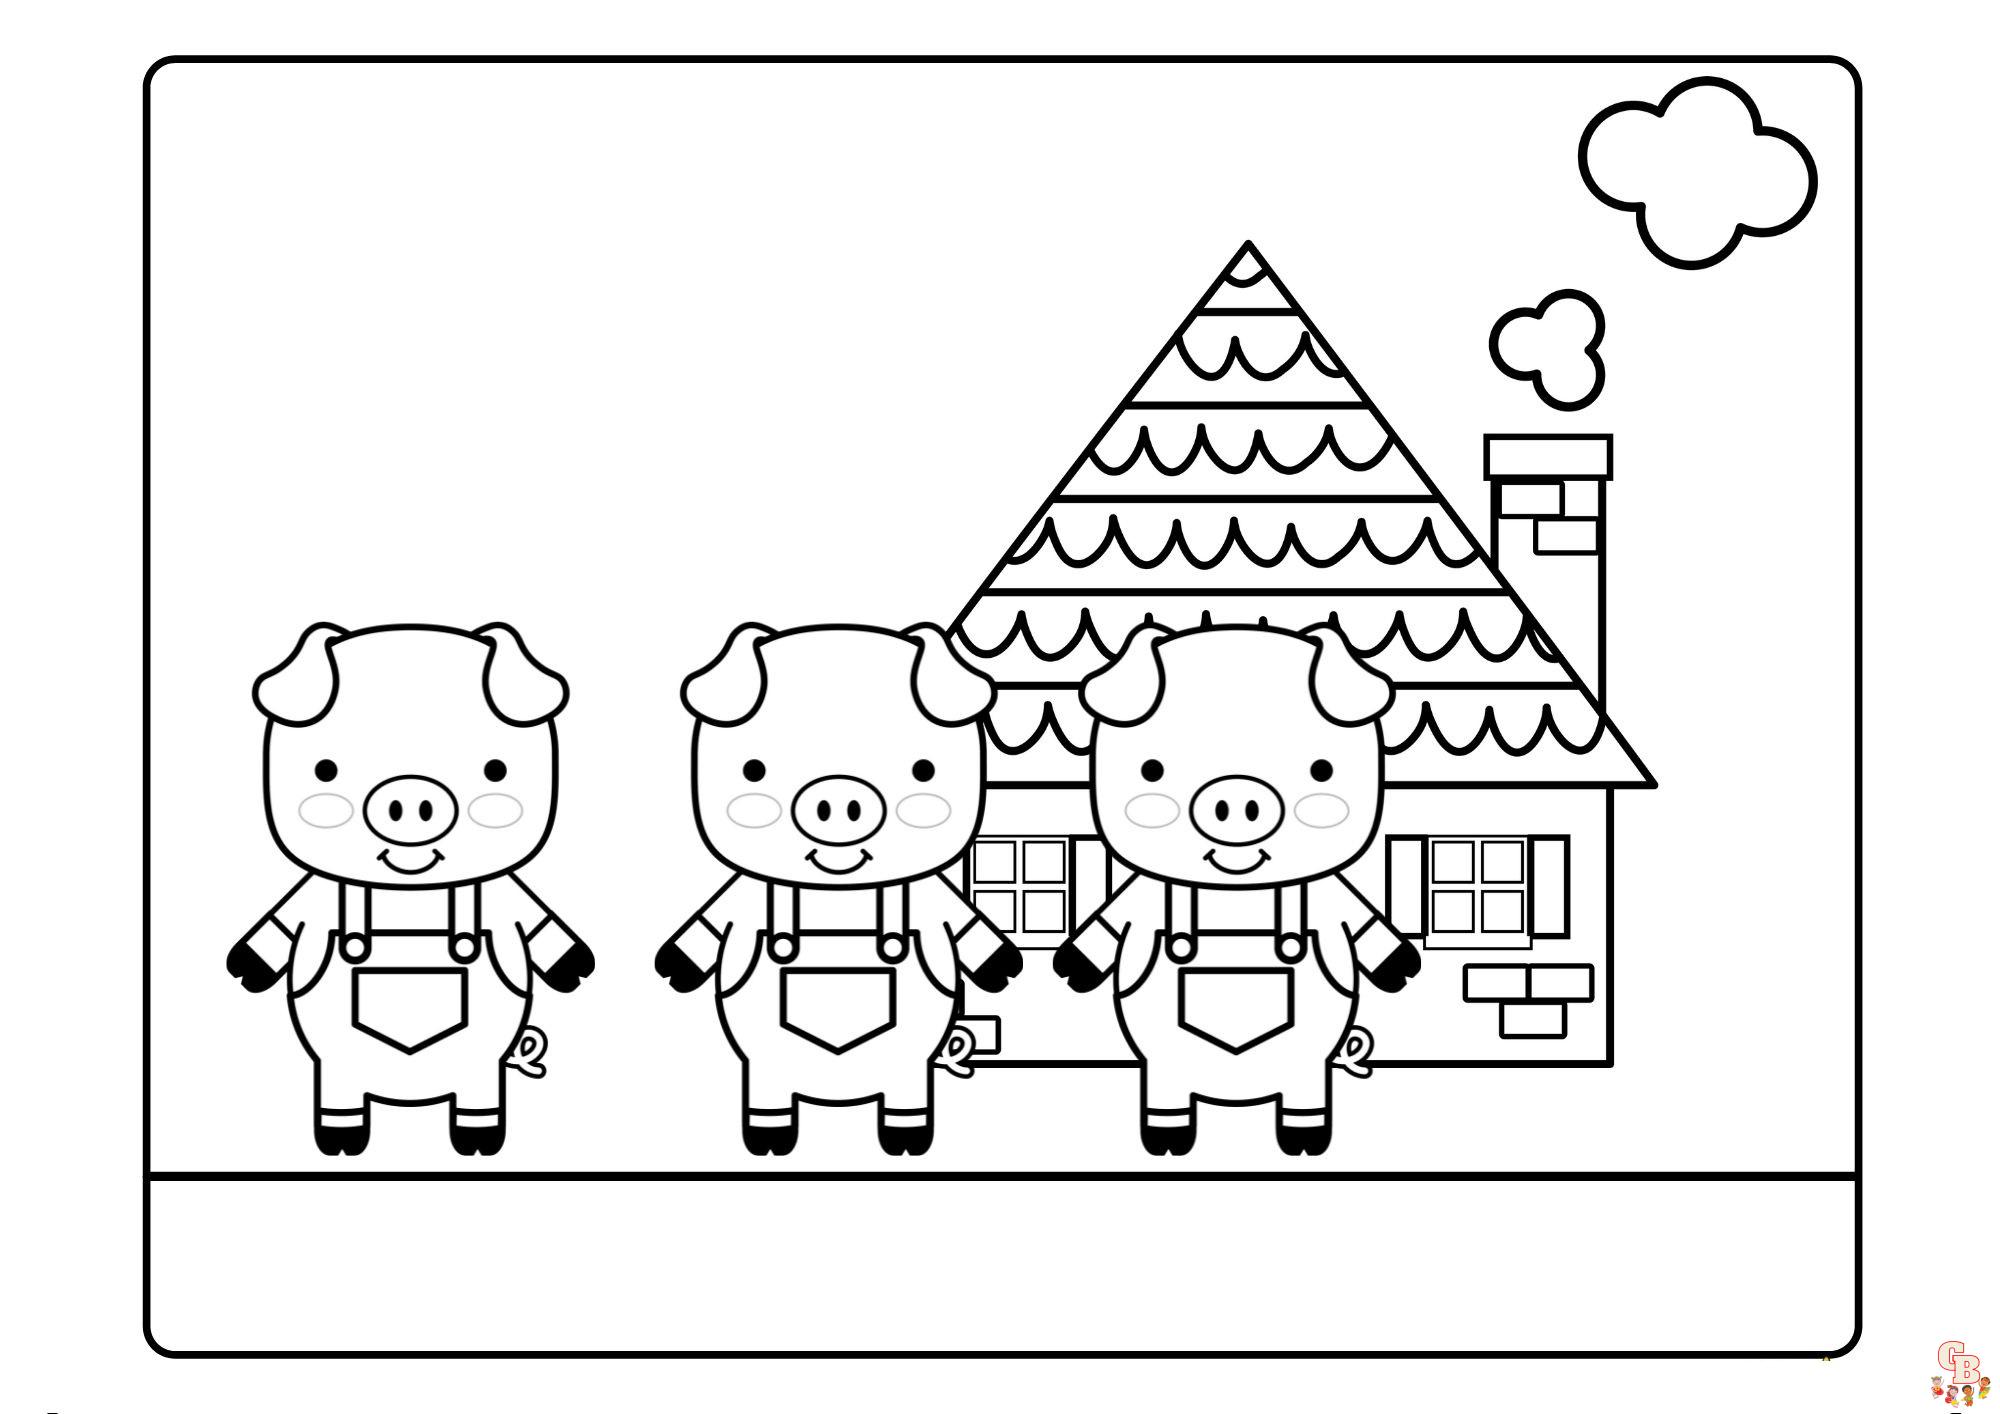 Get creative with three little pigs coloring pages